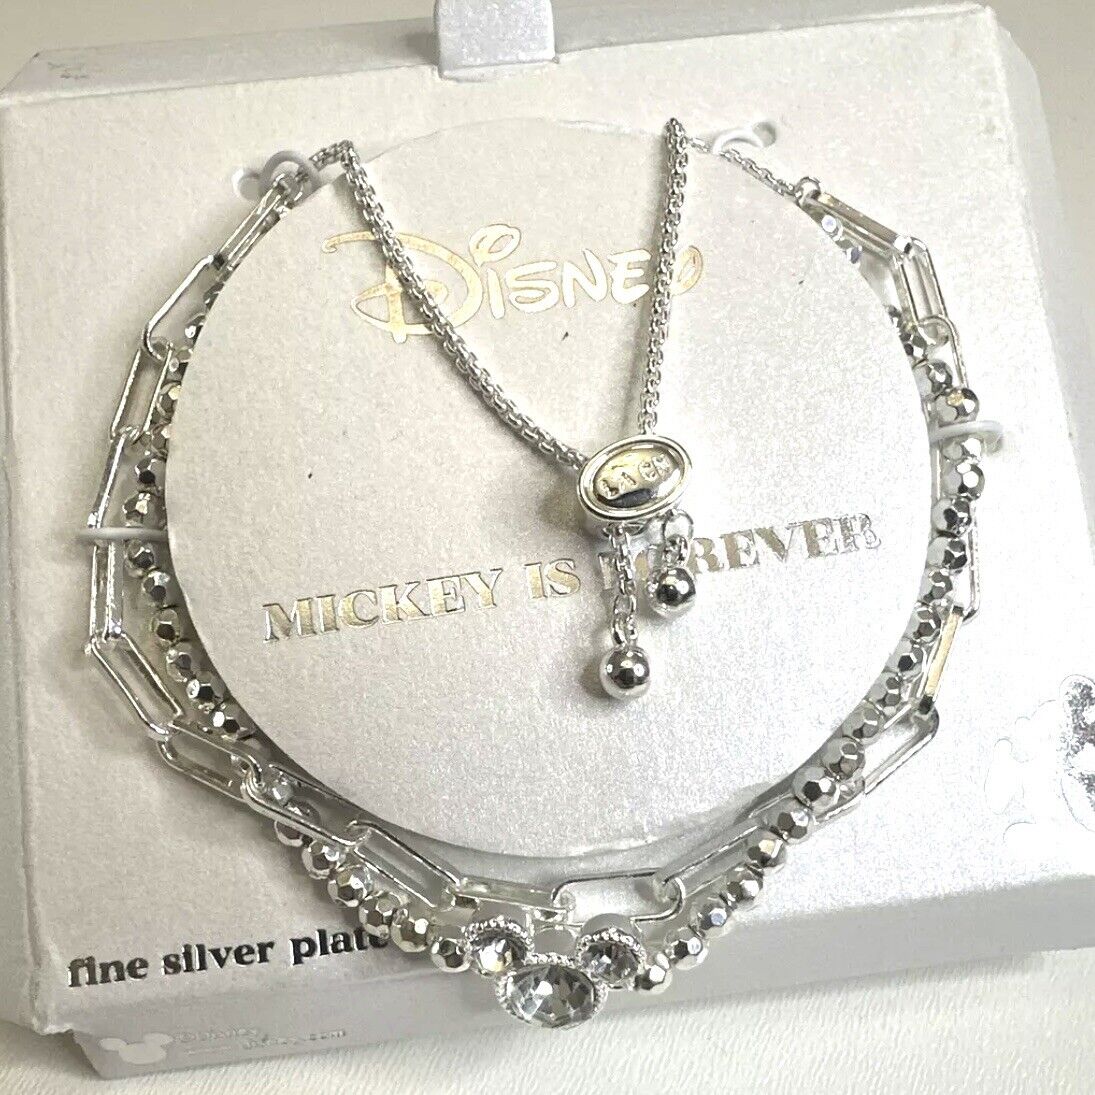 Disney Mickey Is Forever Fine Silver Bracelet New Without Box 